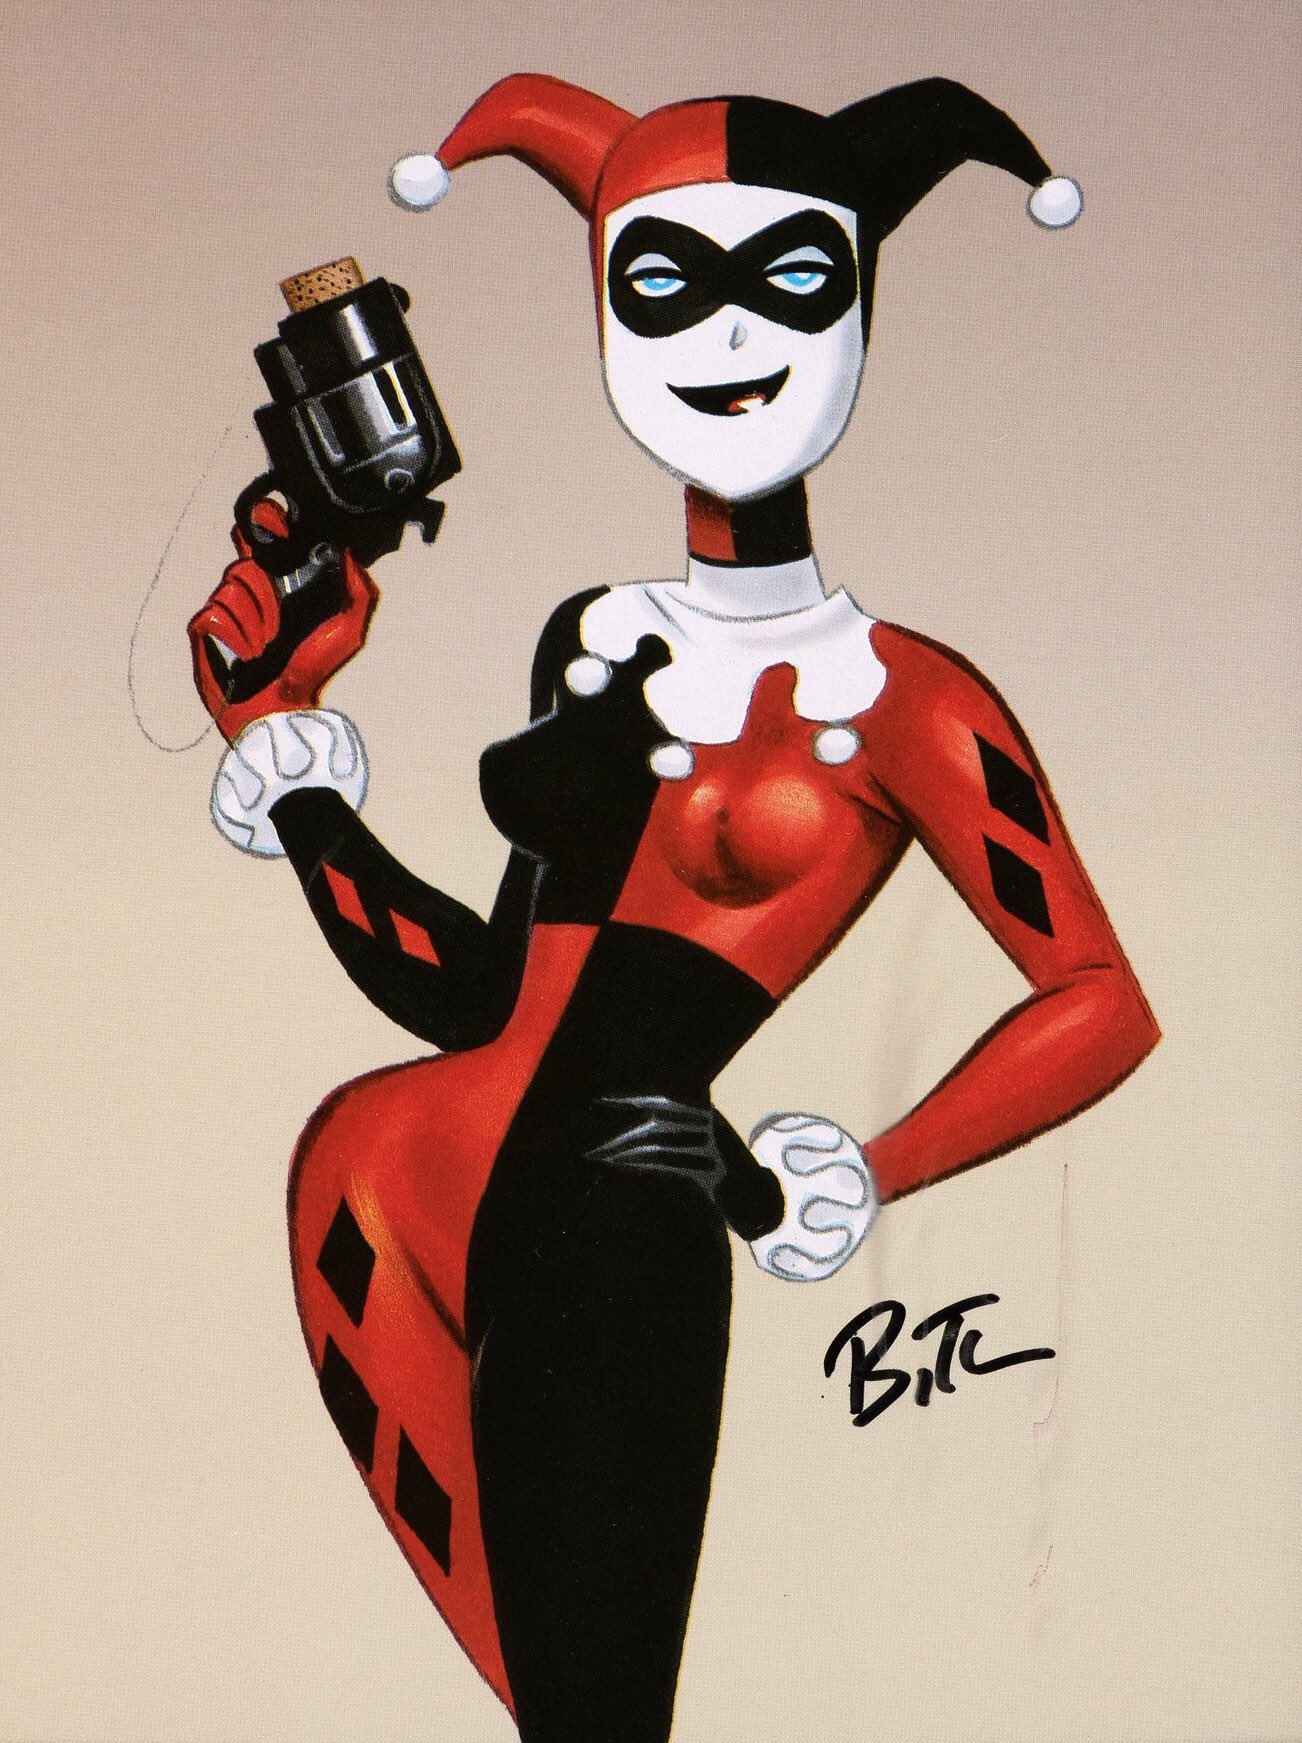 Cool Art on "Harley by Bruce Timm / Twitter